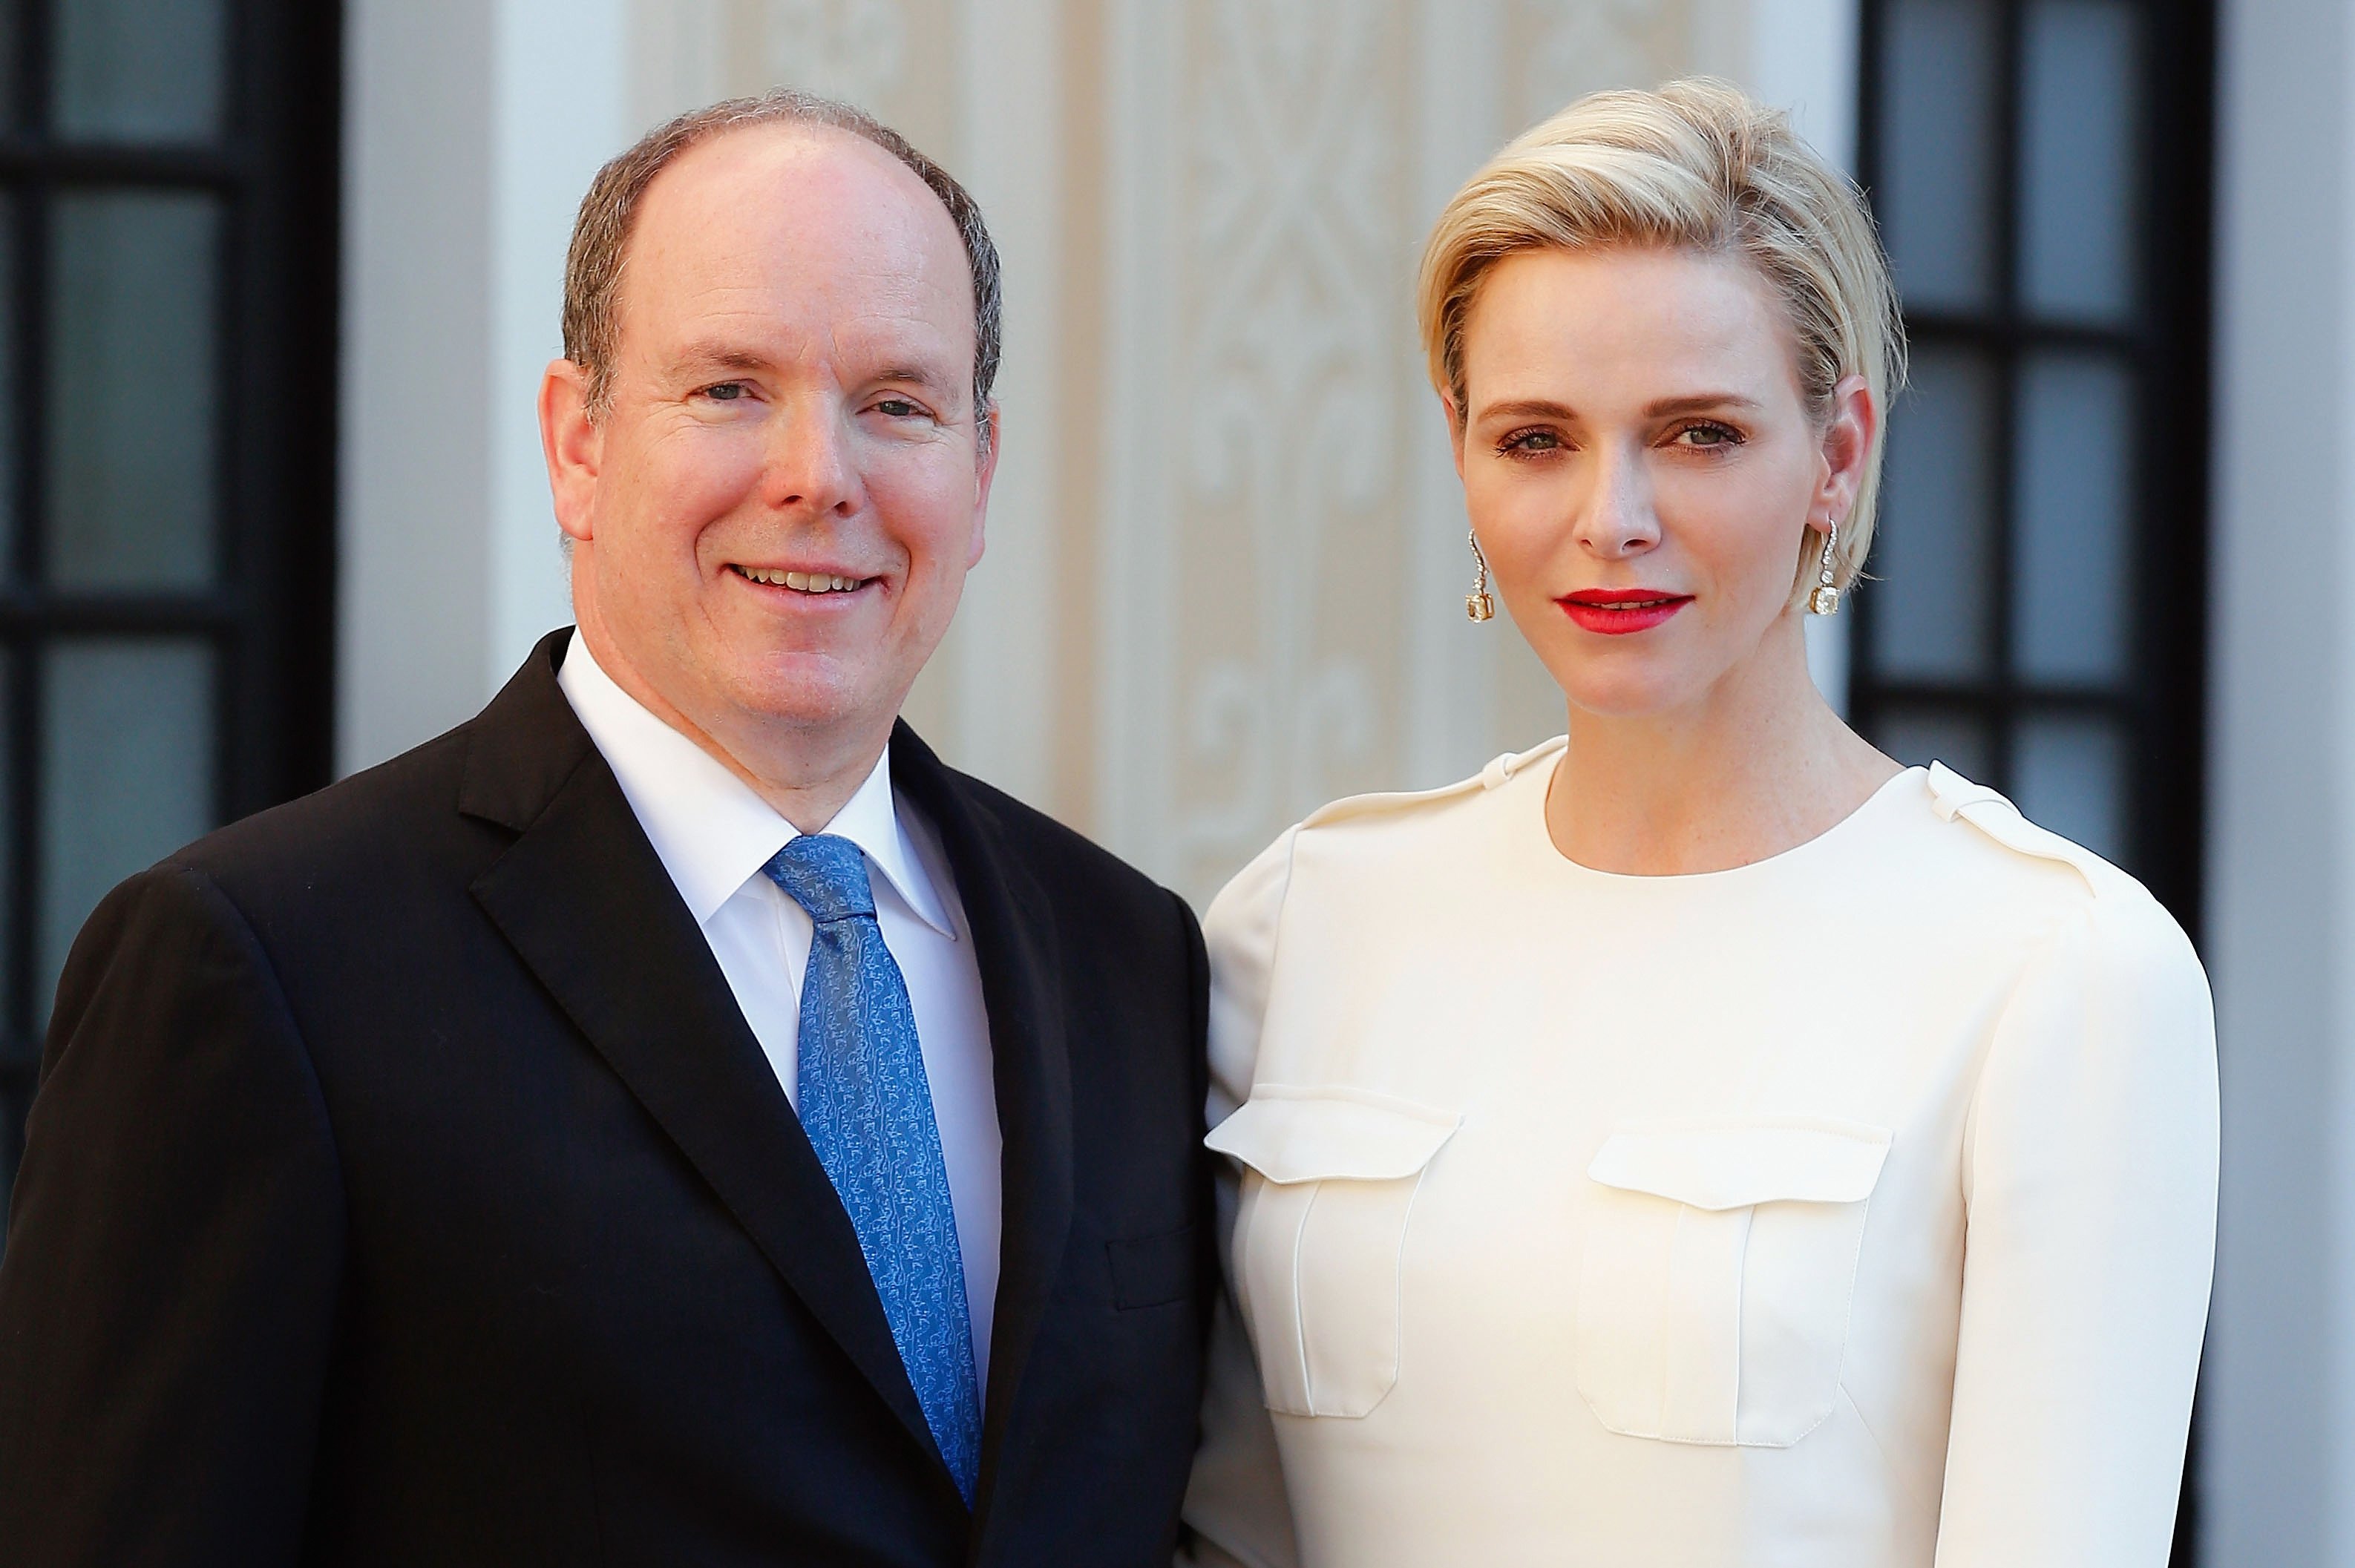 Prince Albert II of Monaco and Princess Charlene of Monaco at the Monaco Palace cocktail party of the 55th Monte Carlo TV festival on June 17, 2015 in Monte-Carlo, Monaco. | Source: Getty Images